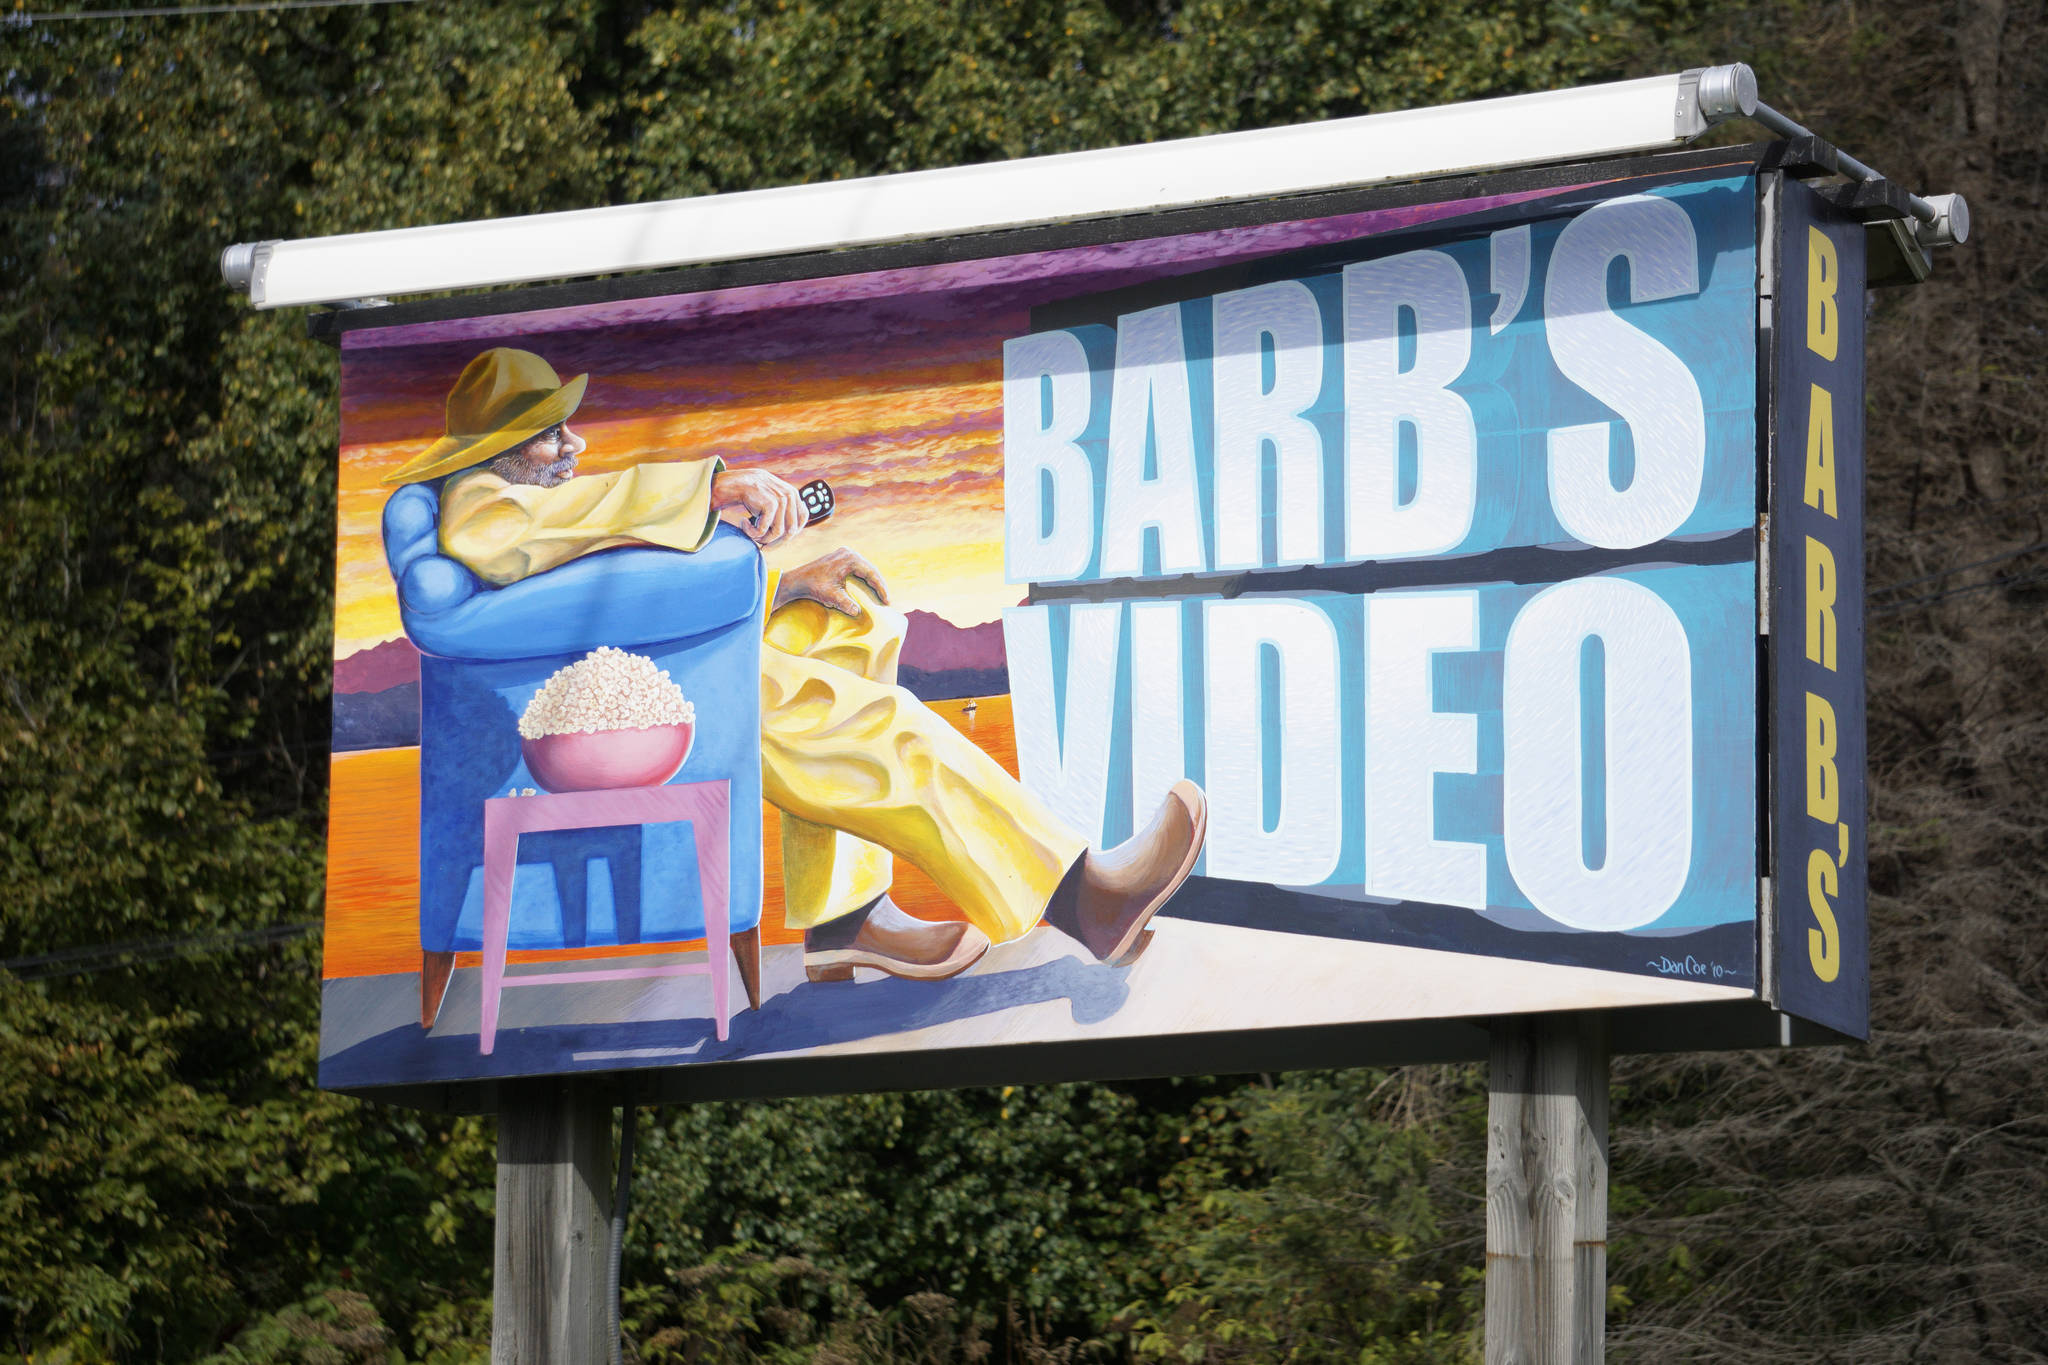 The latest version of the Barb’s Video sign was painted by Dan Coe, as seen in this photo taken Sept. 22, 2018, in Homer, Alaska. (Photo by Michael Armstrong/Homer News)